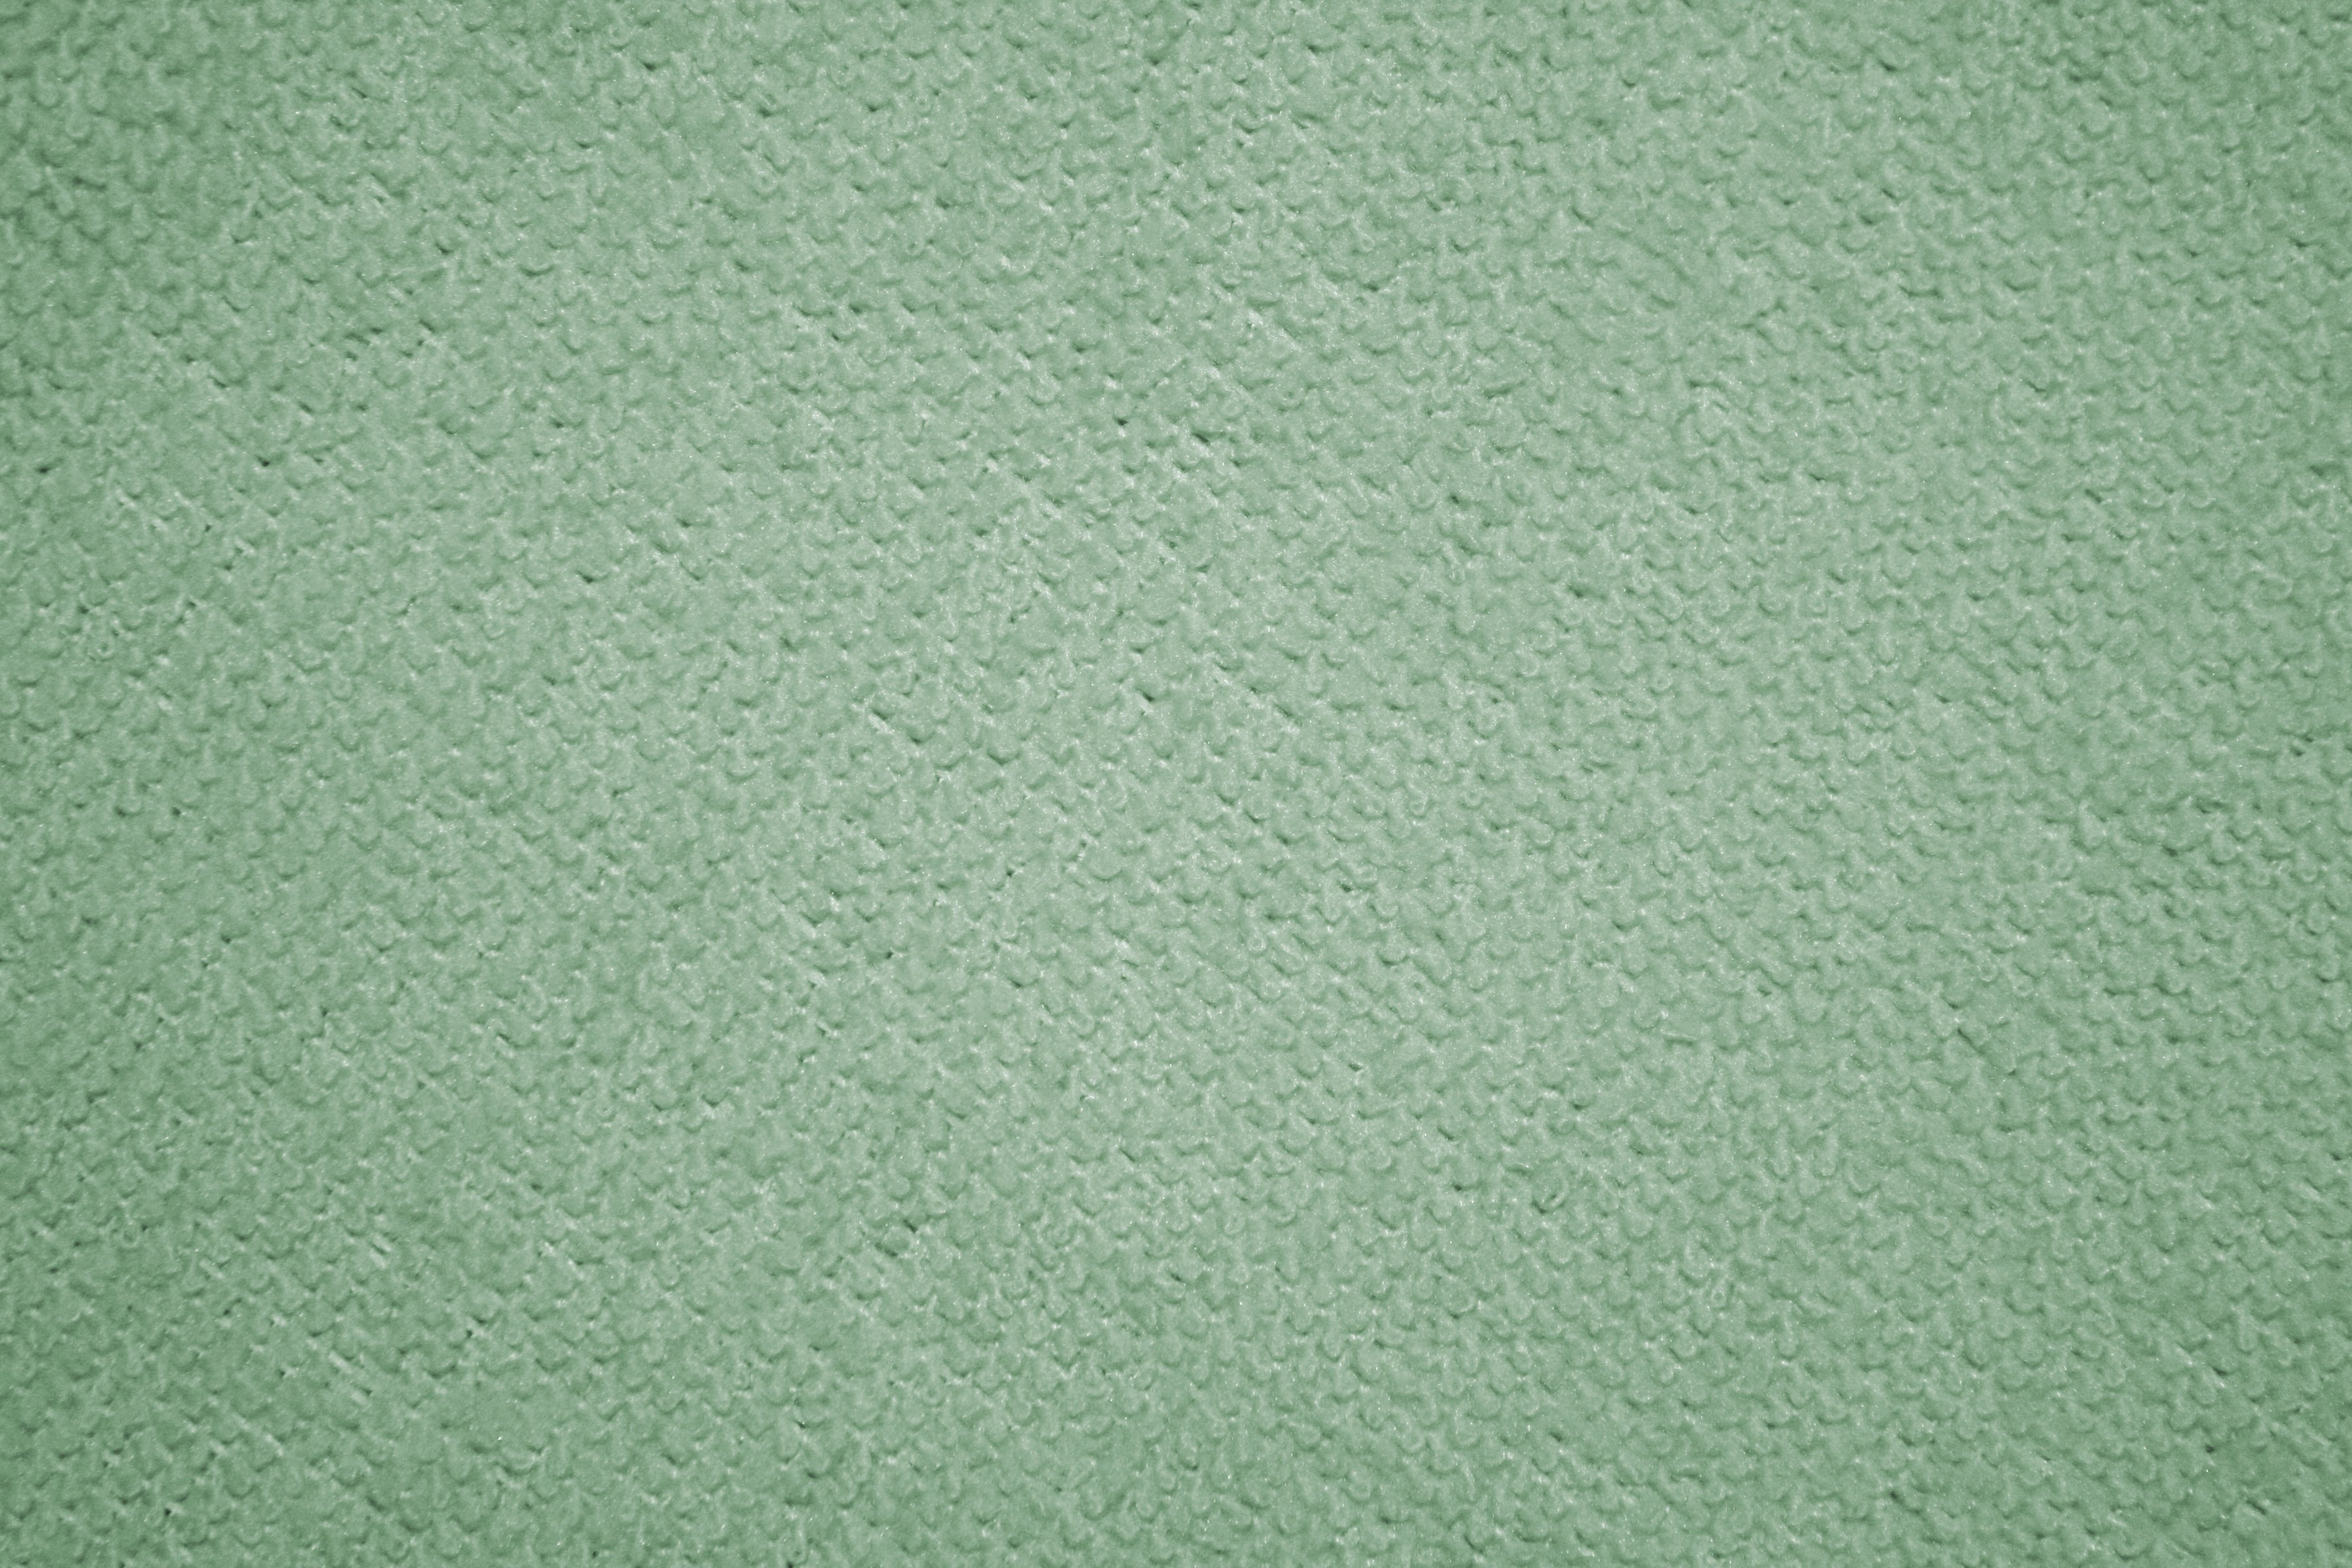 Sage Green Microfiber Cloth Fabric Texture Picture Photograph